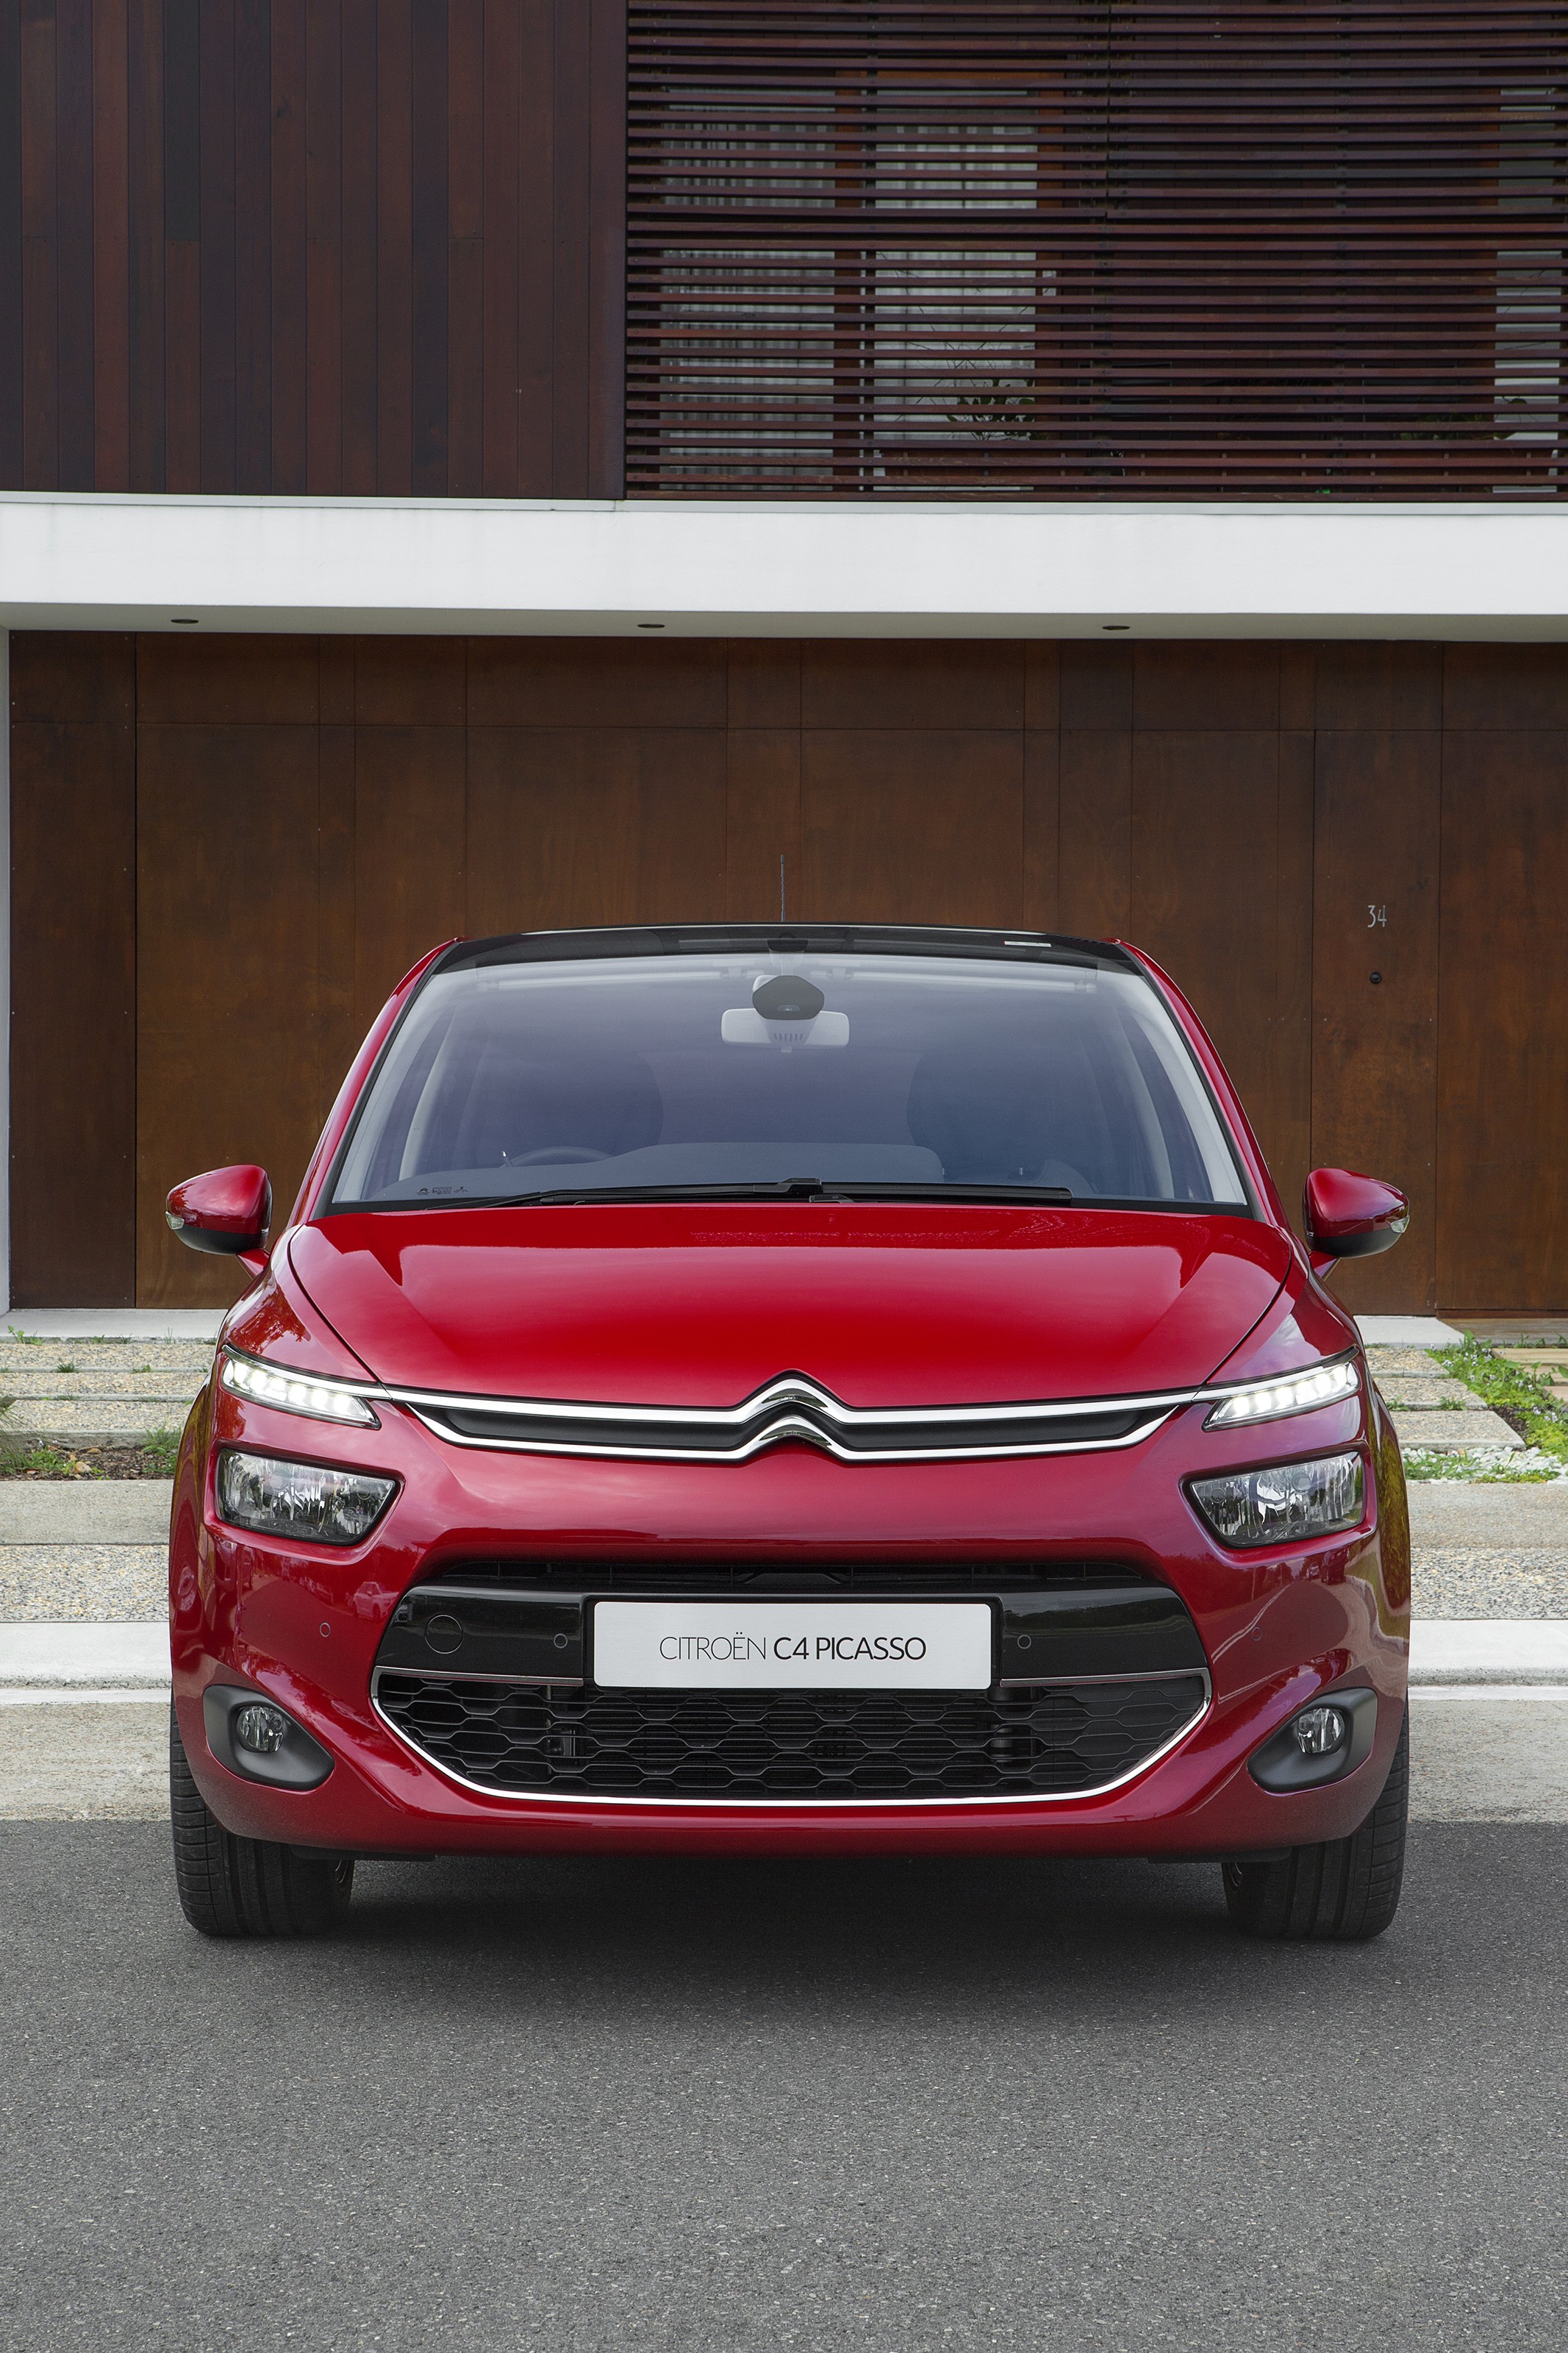 Citroen C4 Picasso exterior restyling